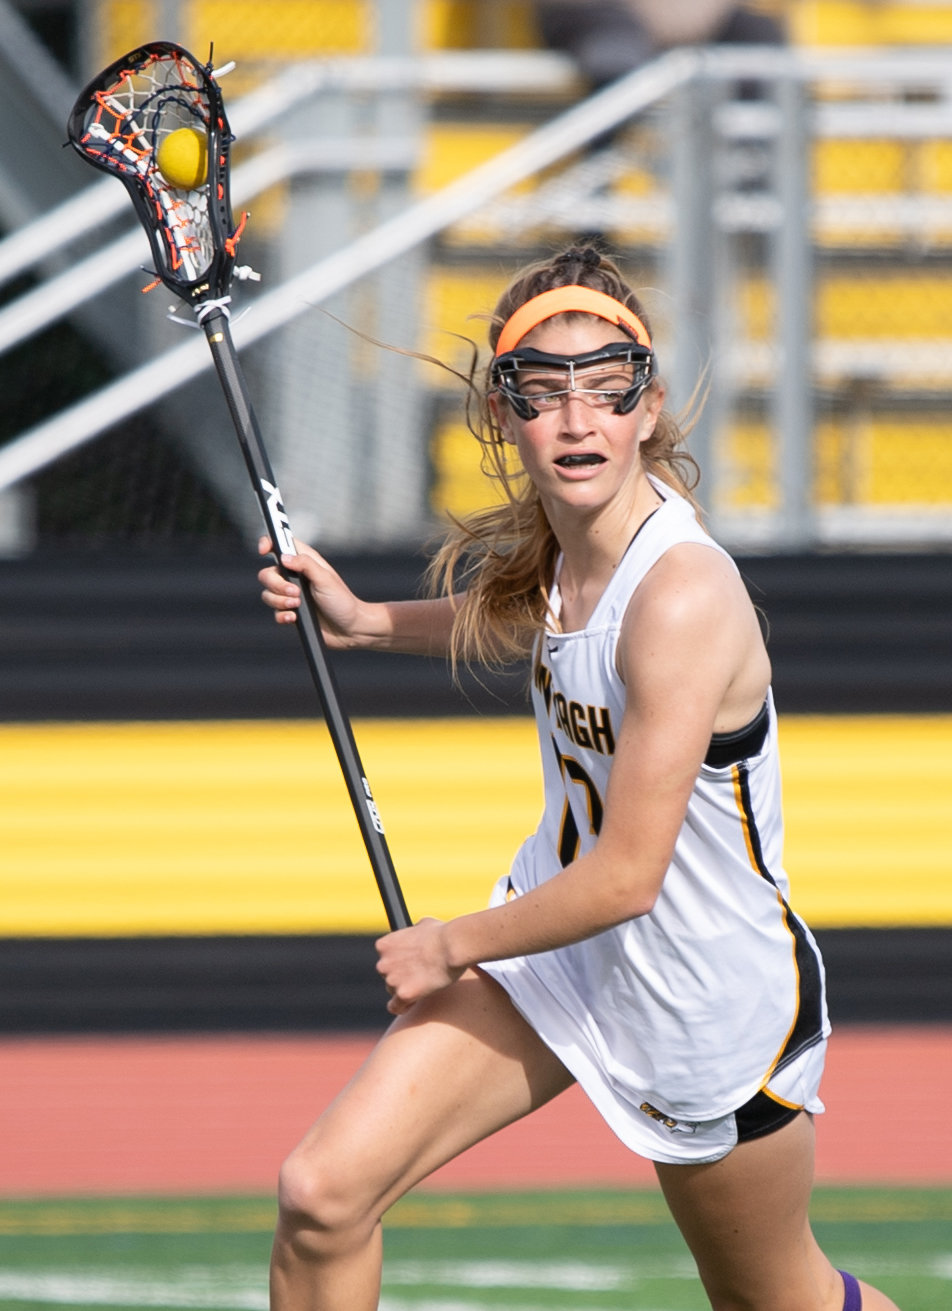 Madison Alaimo, with 89 points, is a key piece of Wantagh’s prolific offense which has produced at least 15 goals seven times.